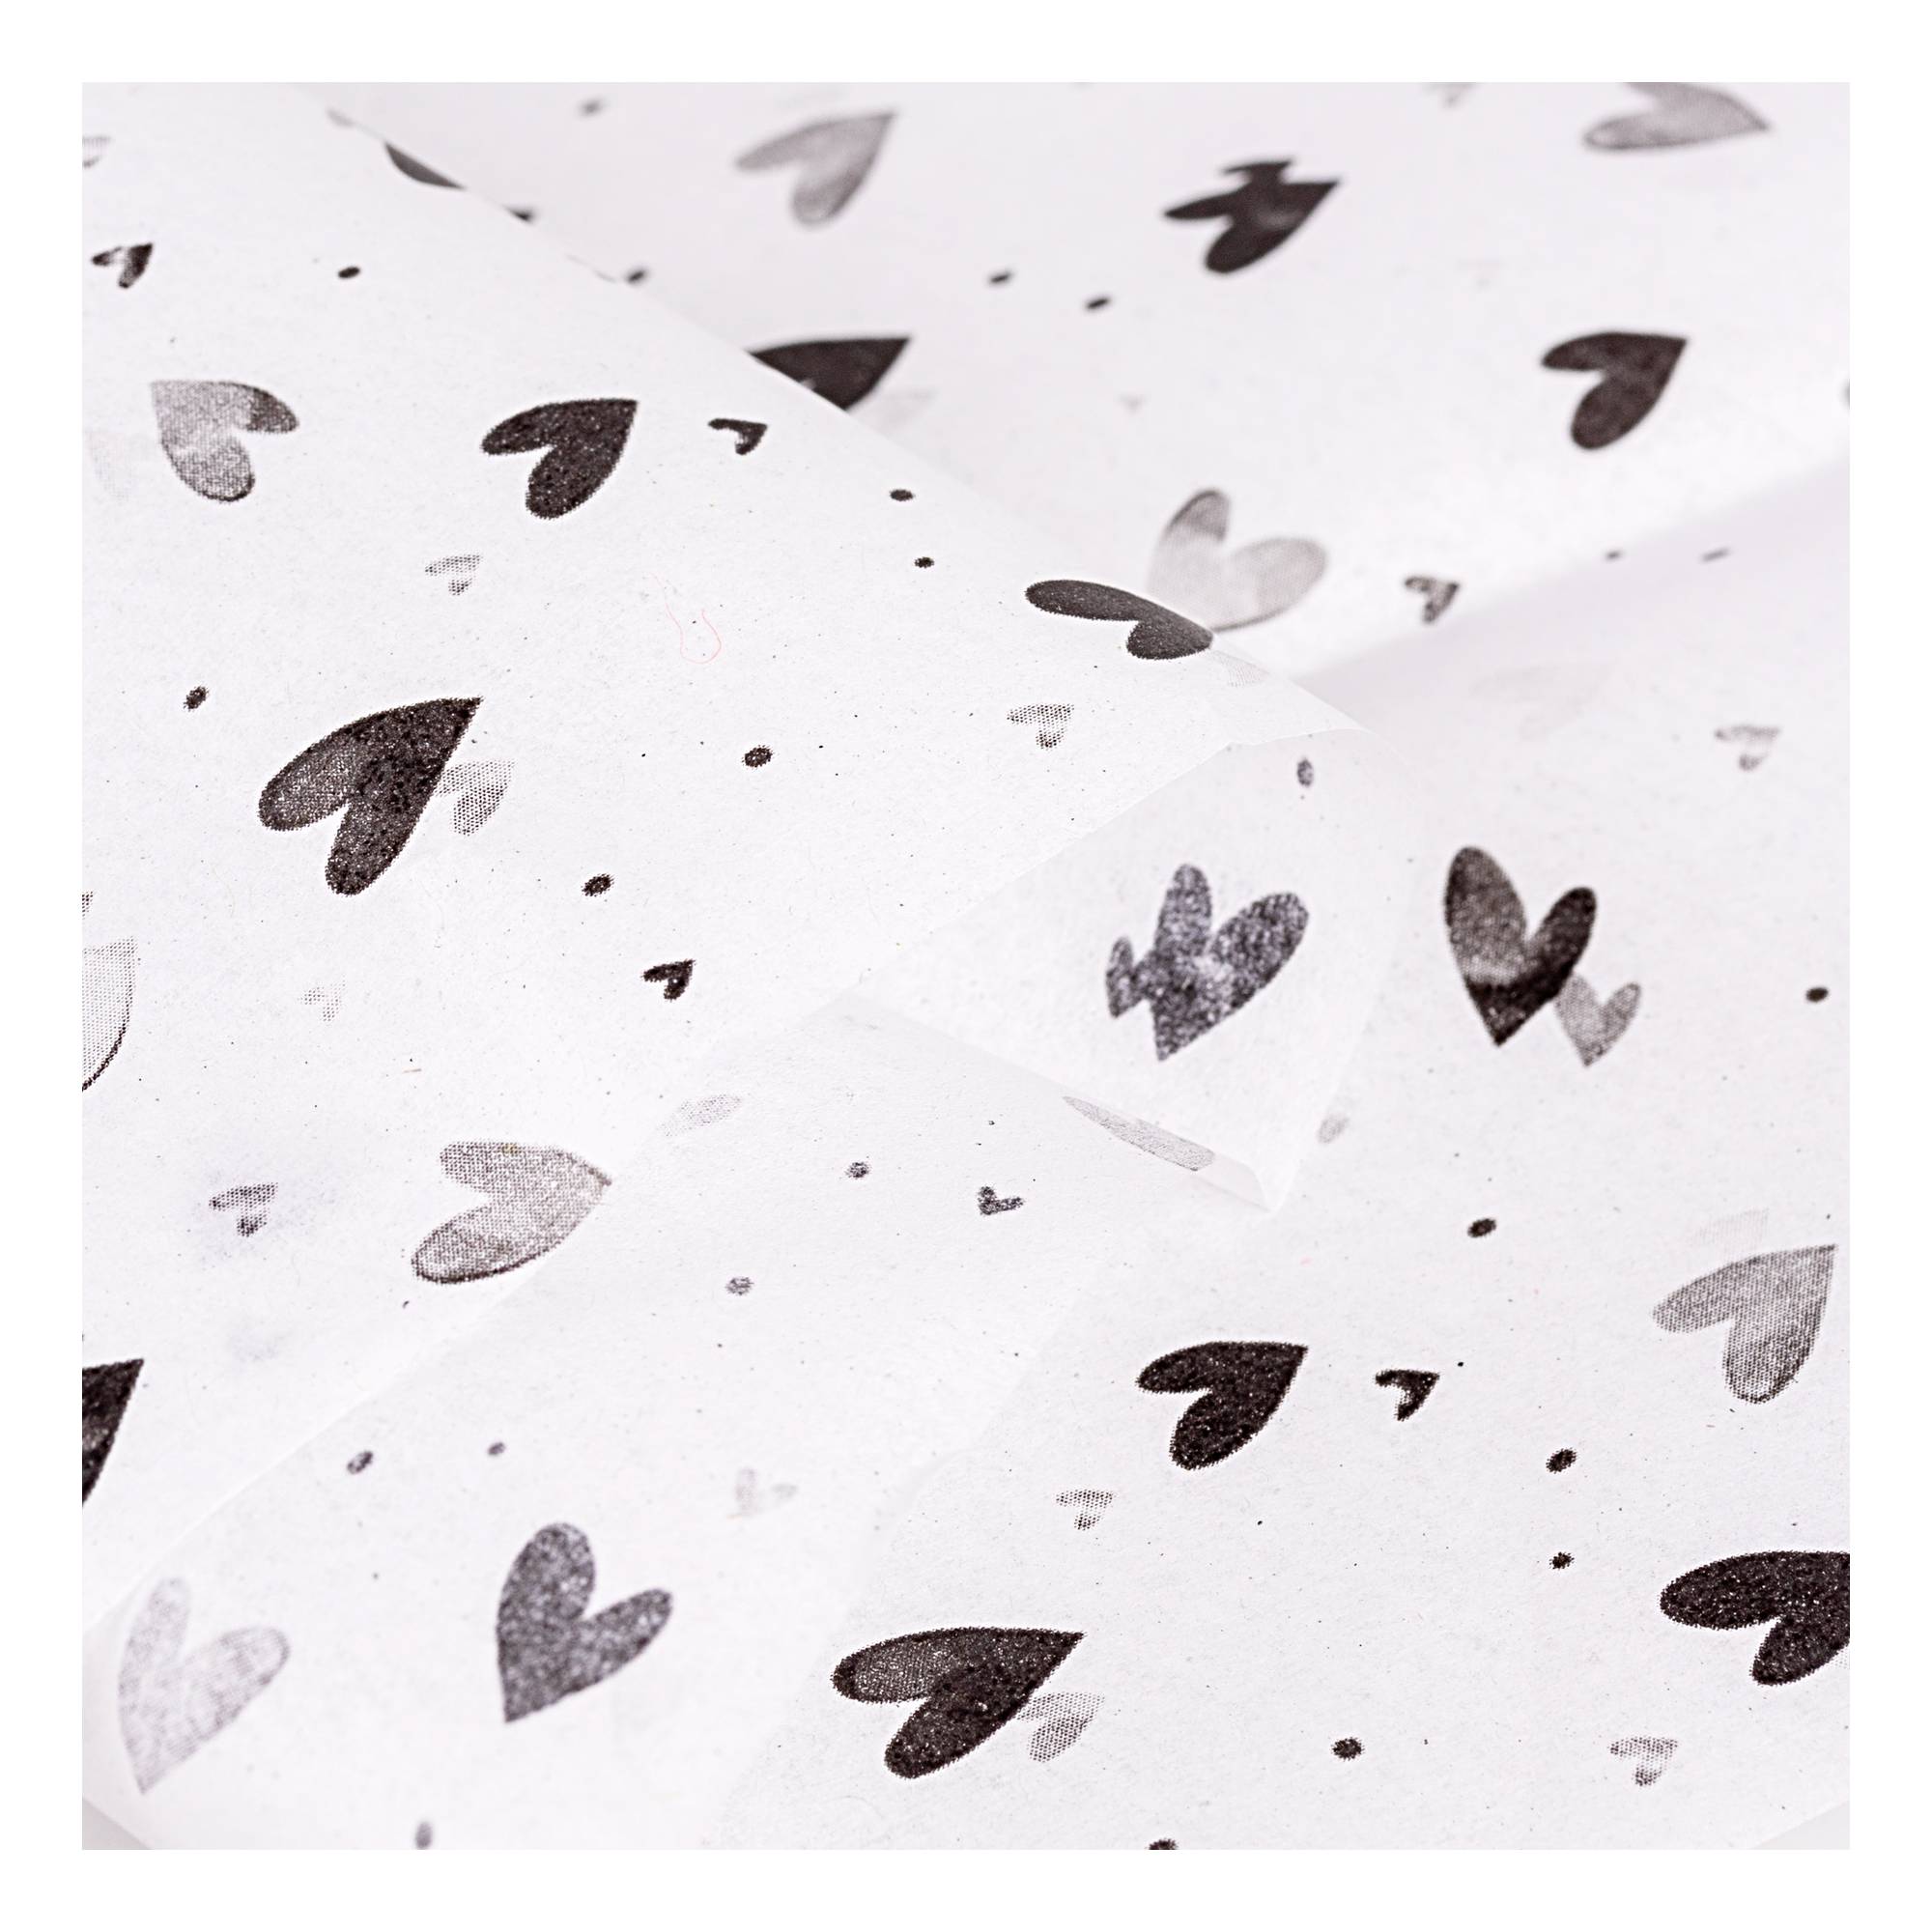 Grey Heart Printed Tissue Paper 50cm x 75cm 6 Pack  image number 2